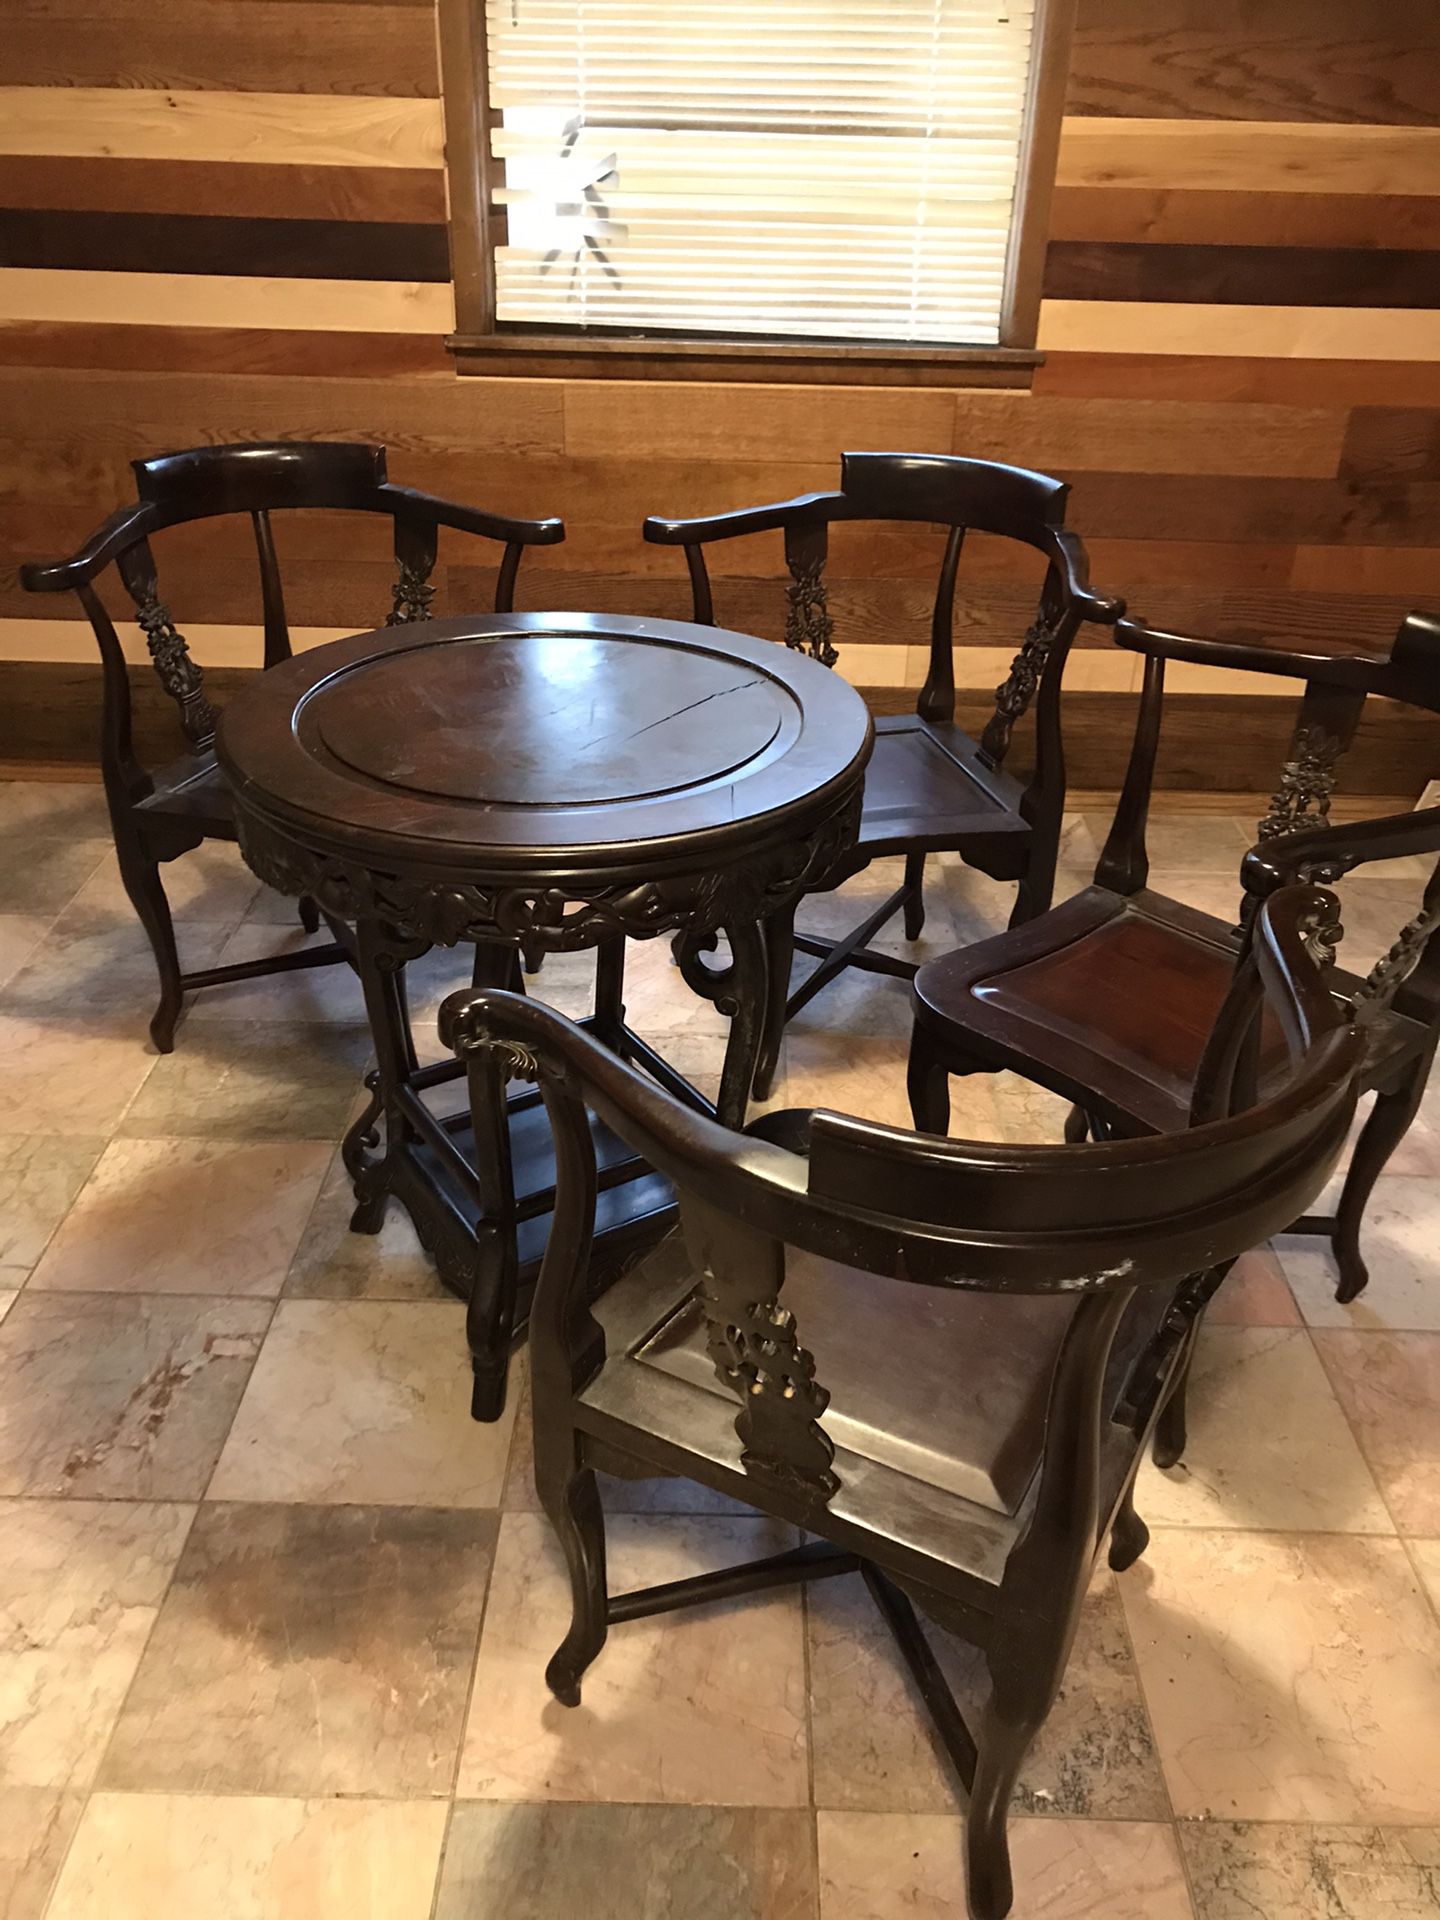 4 chairs table and wine rack